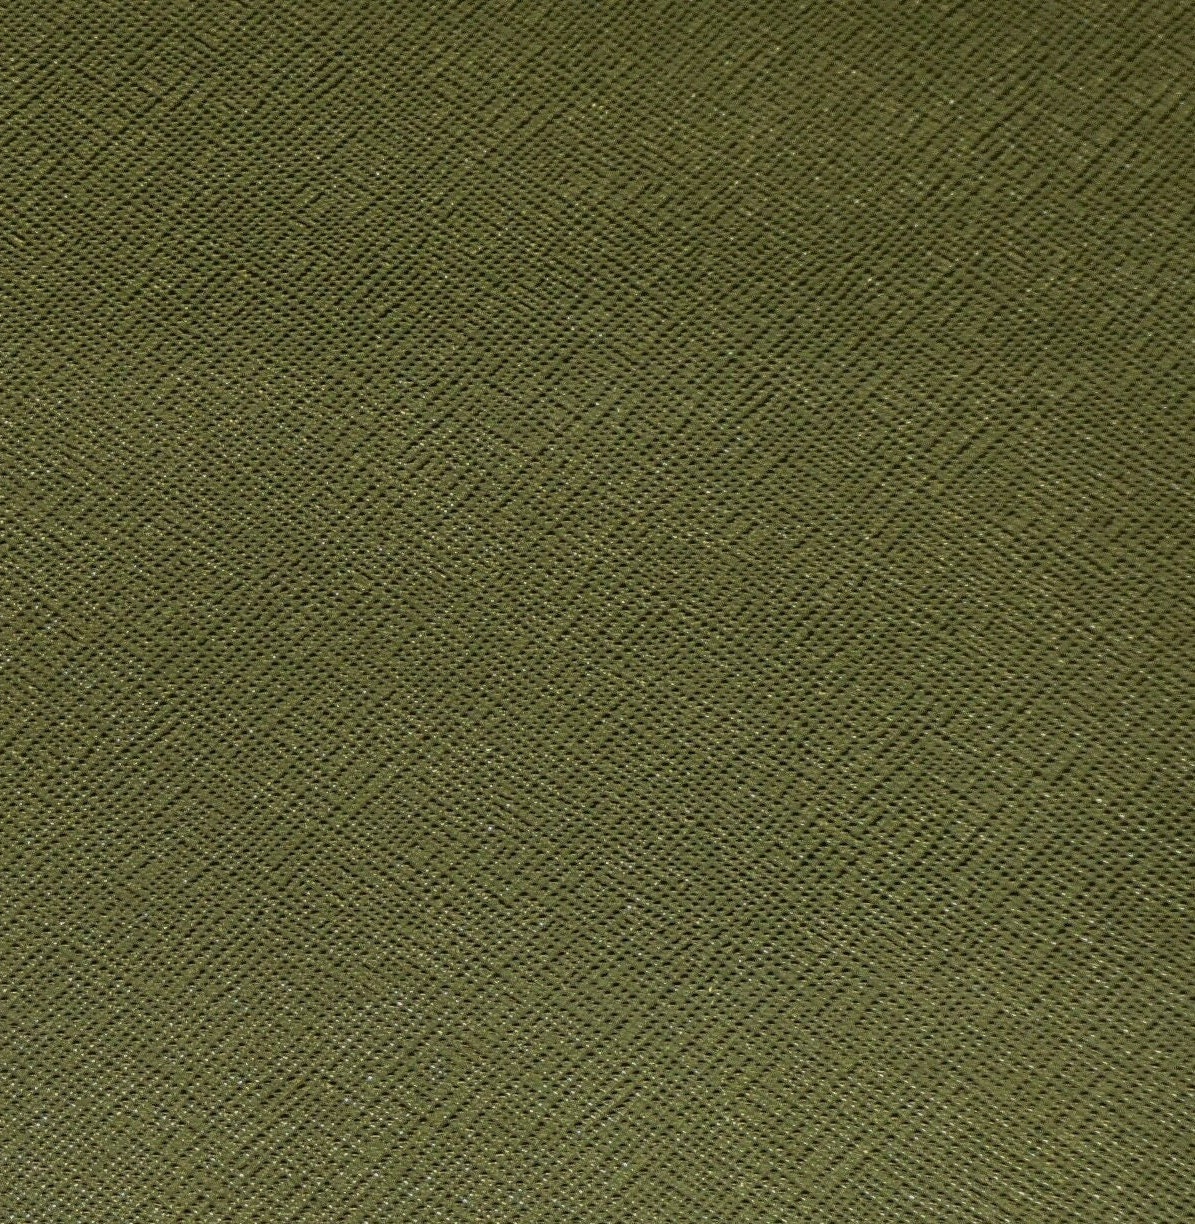 Saffiano 3-4-5-6 sq ft Shiny Dark OLIVE Green Weave Embossed Cowhide  Leather thin at 2.25-2.5oz/0.9-1.0 mm PeggySueAlso E8201-58 hides too